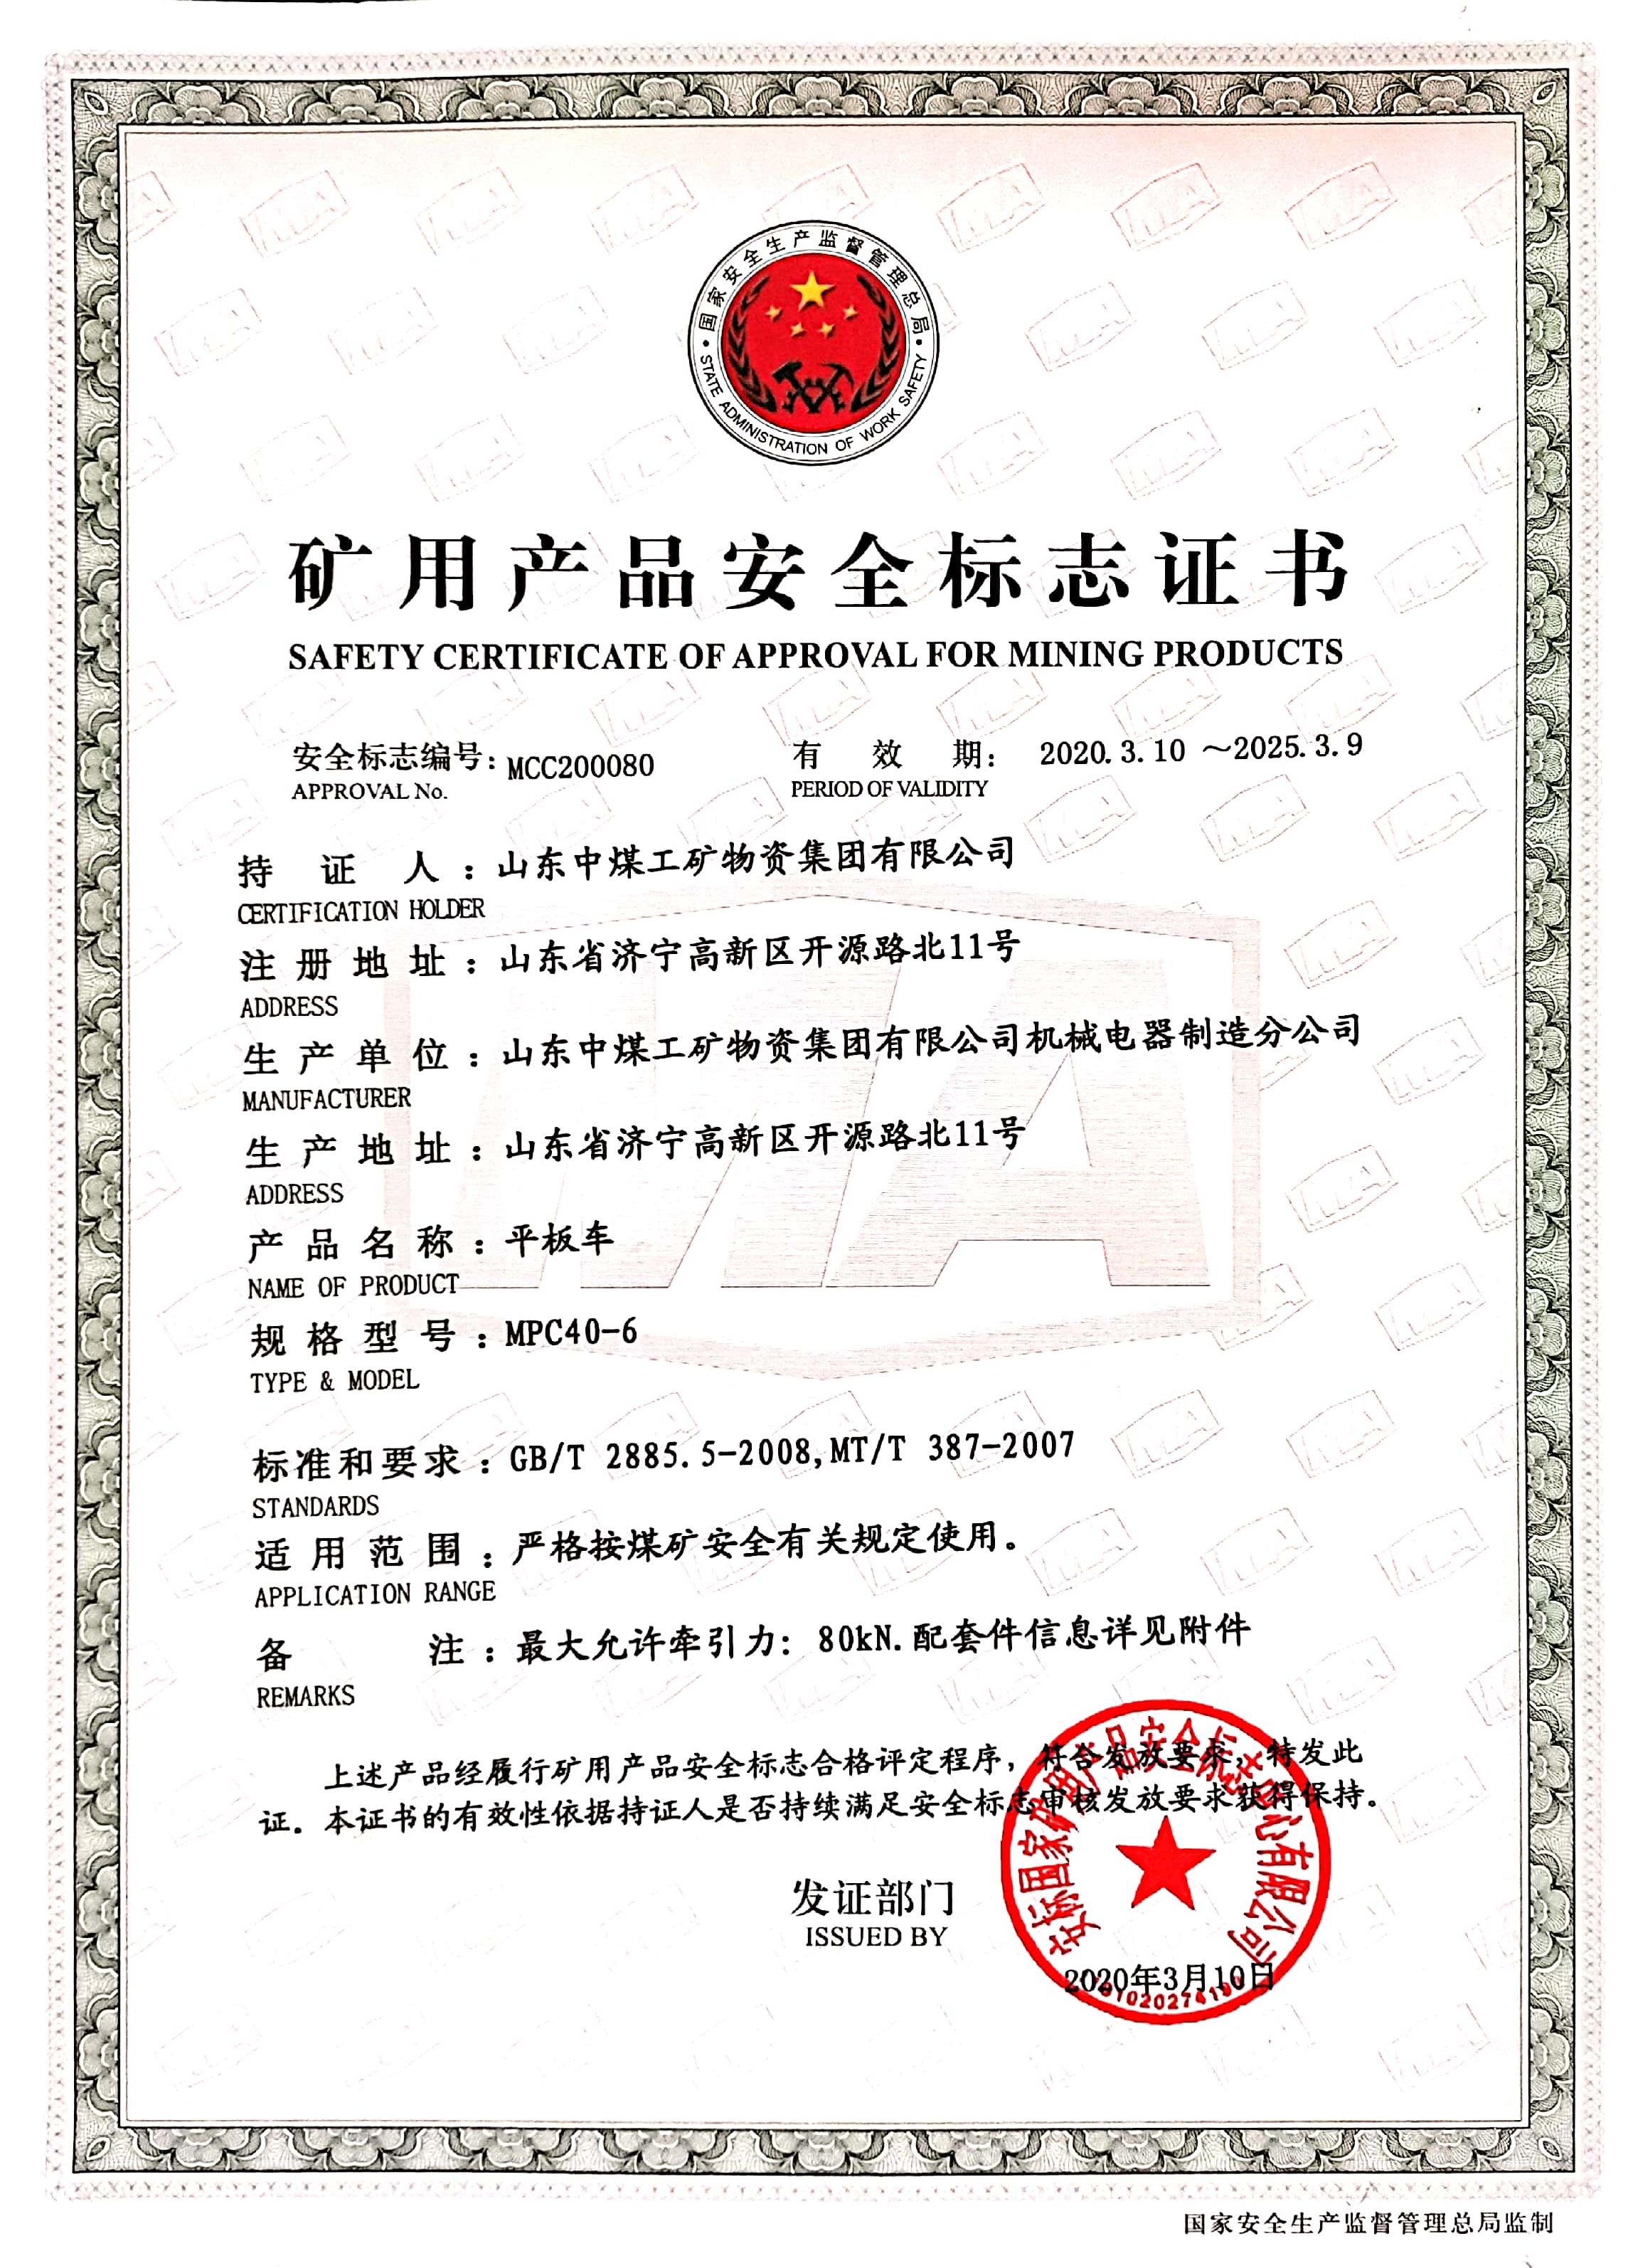 Warm Congratulations China Coal Group Add 3 More National Mining Product Safety Sign Certificate